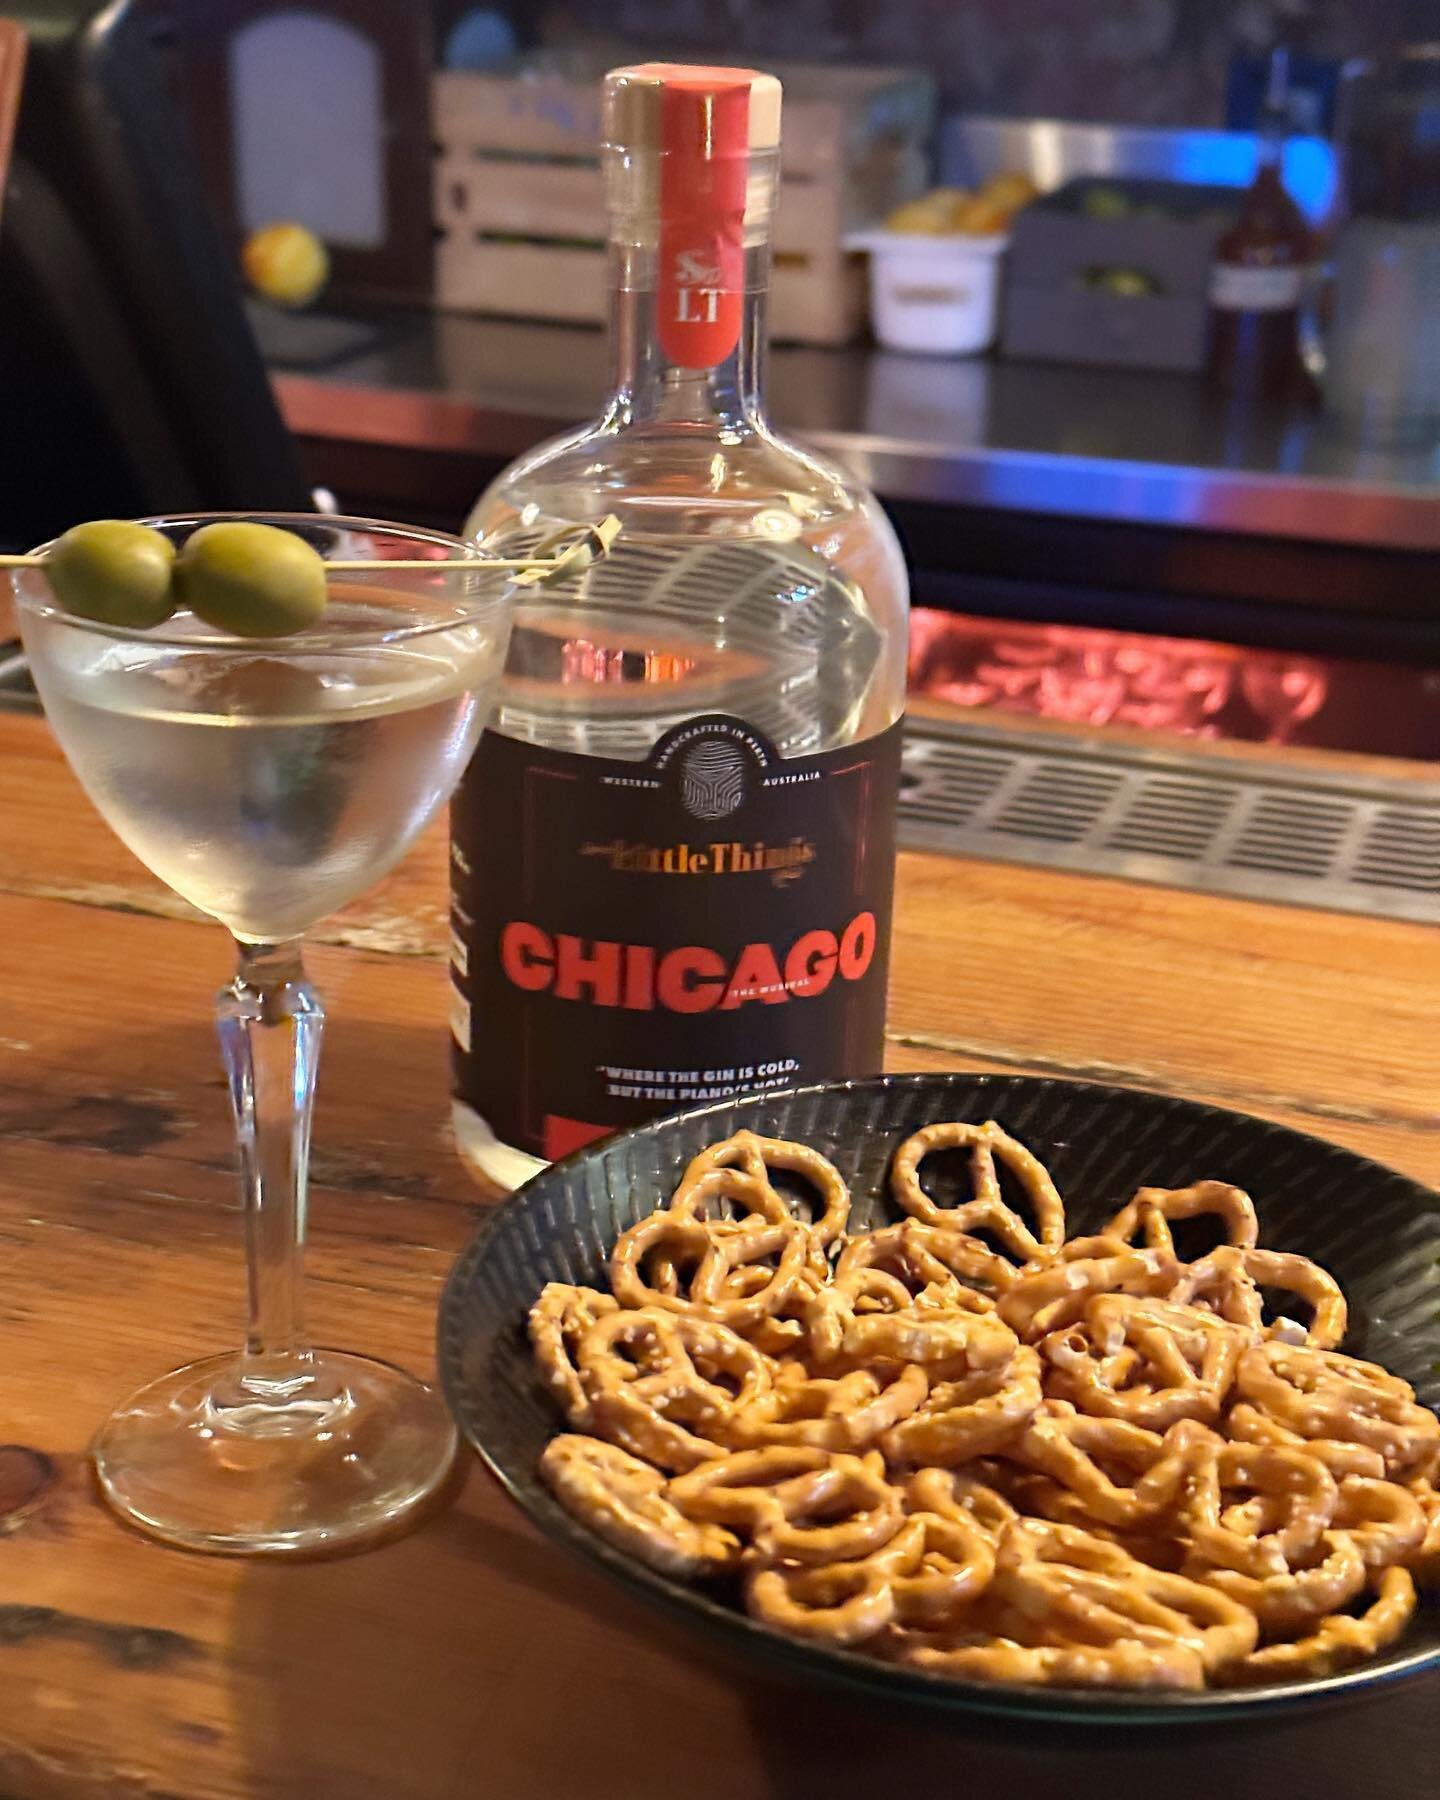 It&rsquo;s the last weekend to see the sensational @chicagoinau in Perth. 

Grab a Chicago inspired cocktail made with @littlethingsgin x CHICAGO gin &lsquo;ALL THAT JAZZ&rsquo; (&amp; 🥨) at Varnish on King and Hadiqa before the show. We love the Fo